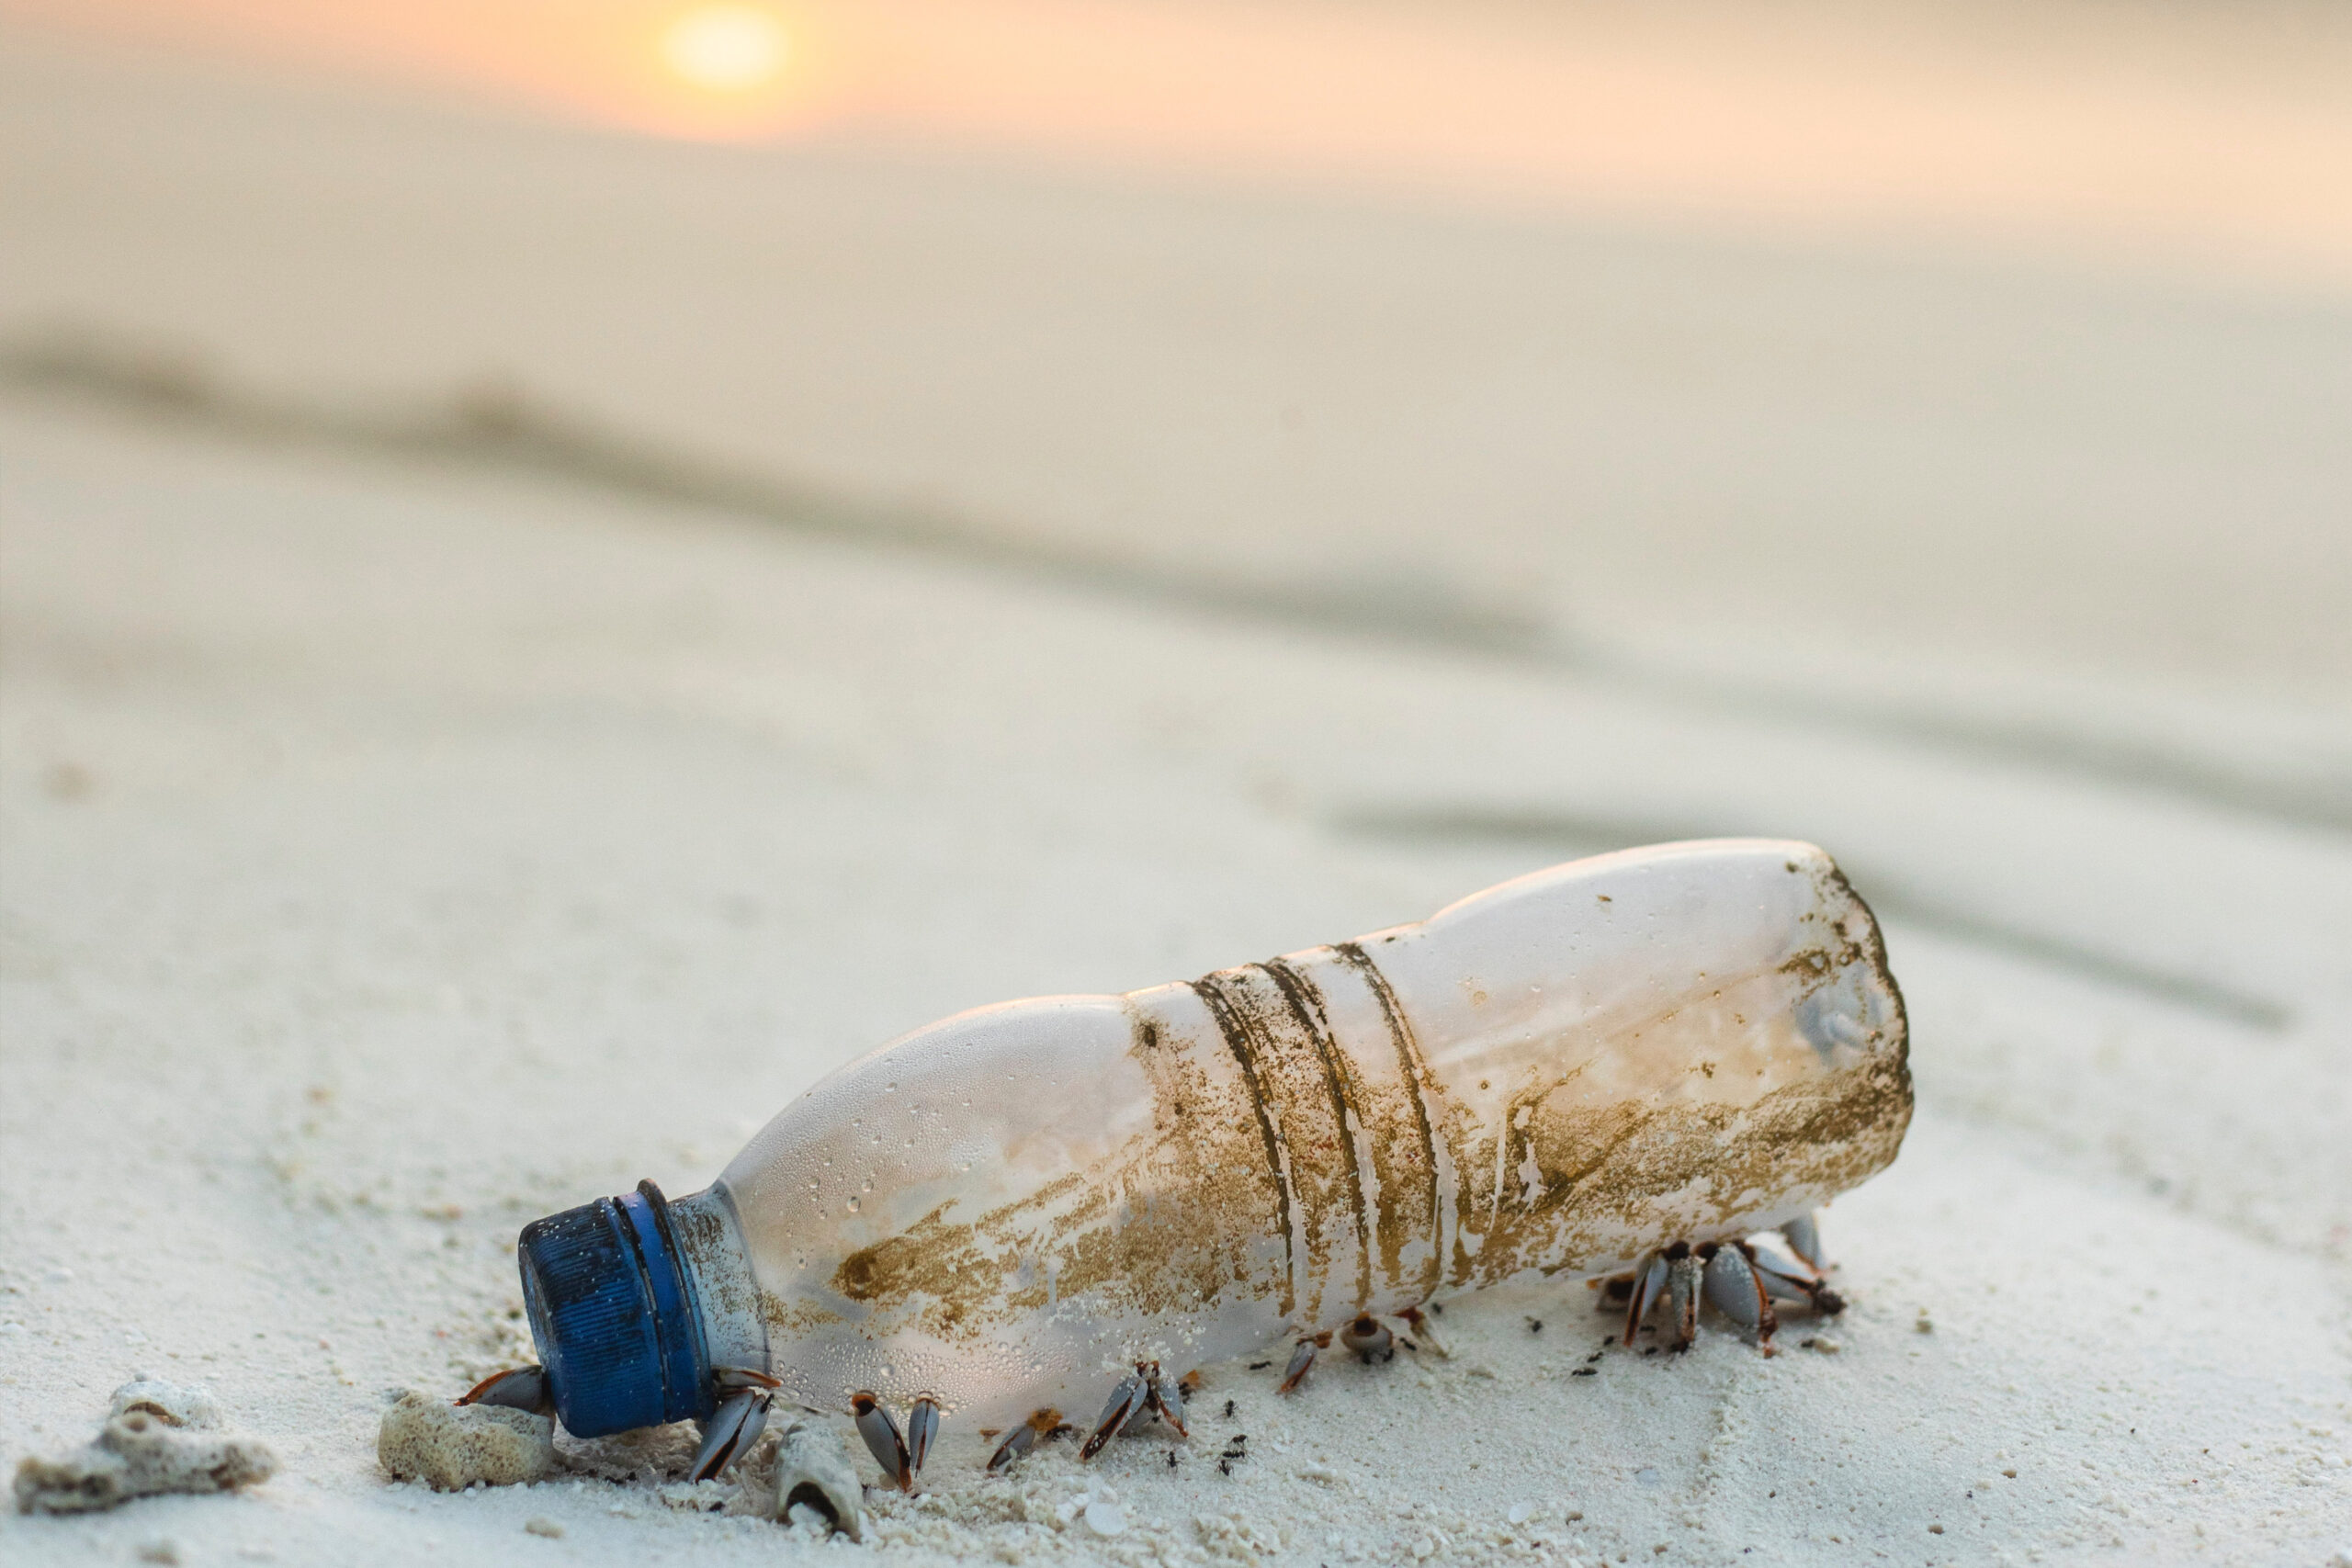 Looking Back on 2018’s Fight for Trash Free Seas®